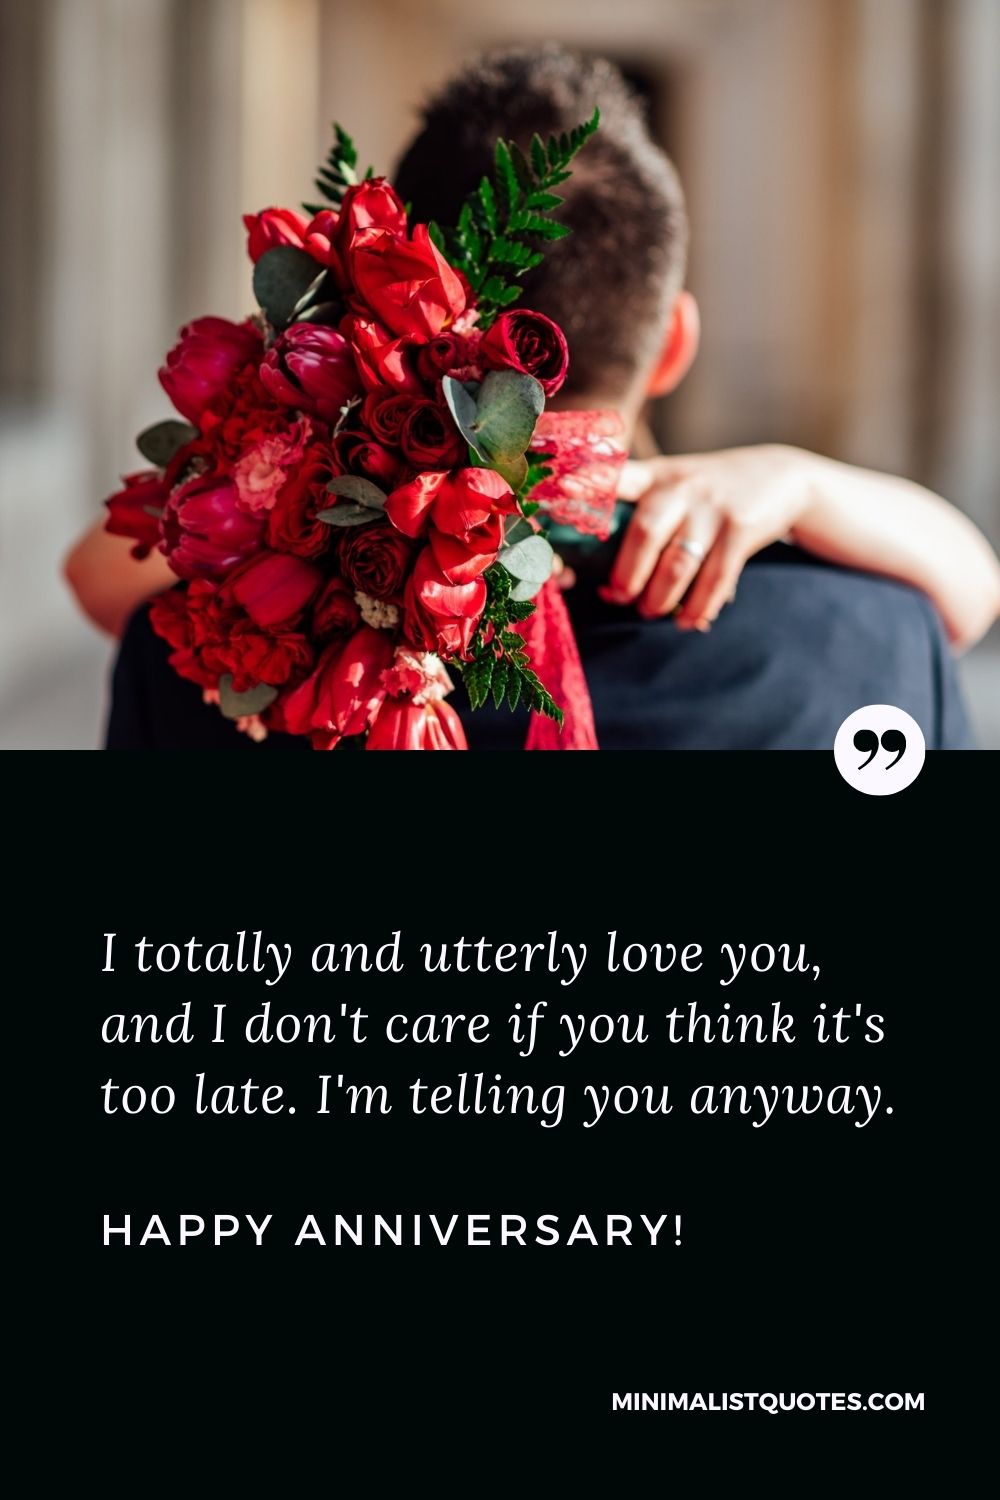 Anniversary Wishes For Husband: I totally and utterly love you, and I don't care if you think it's too late. I'm telling you anyway. Happy Anniversary!